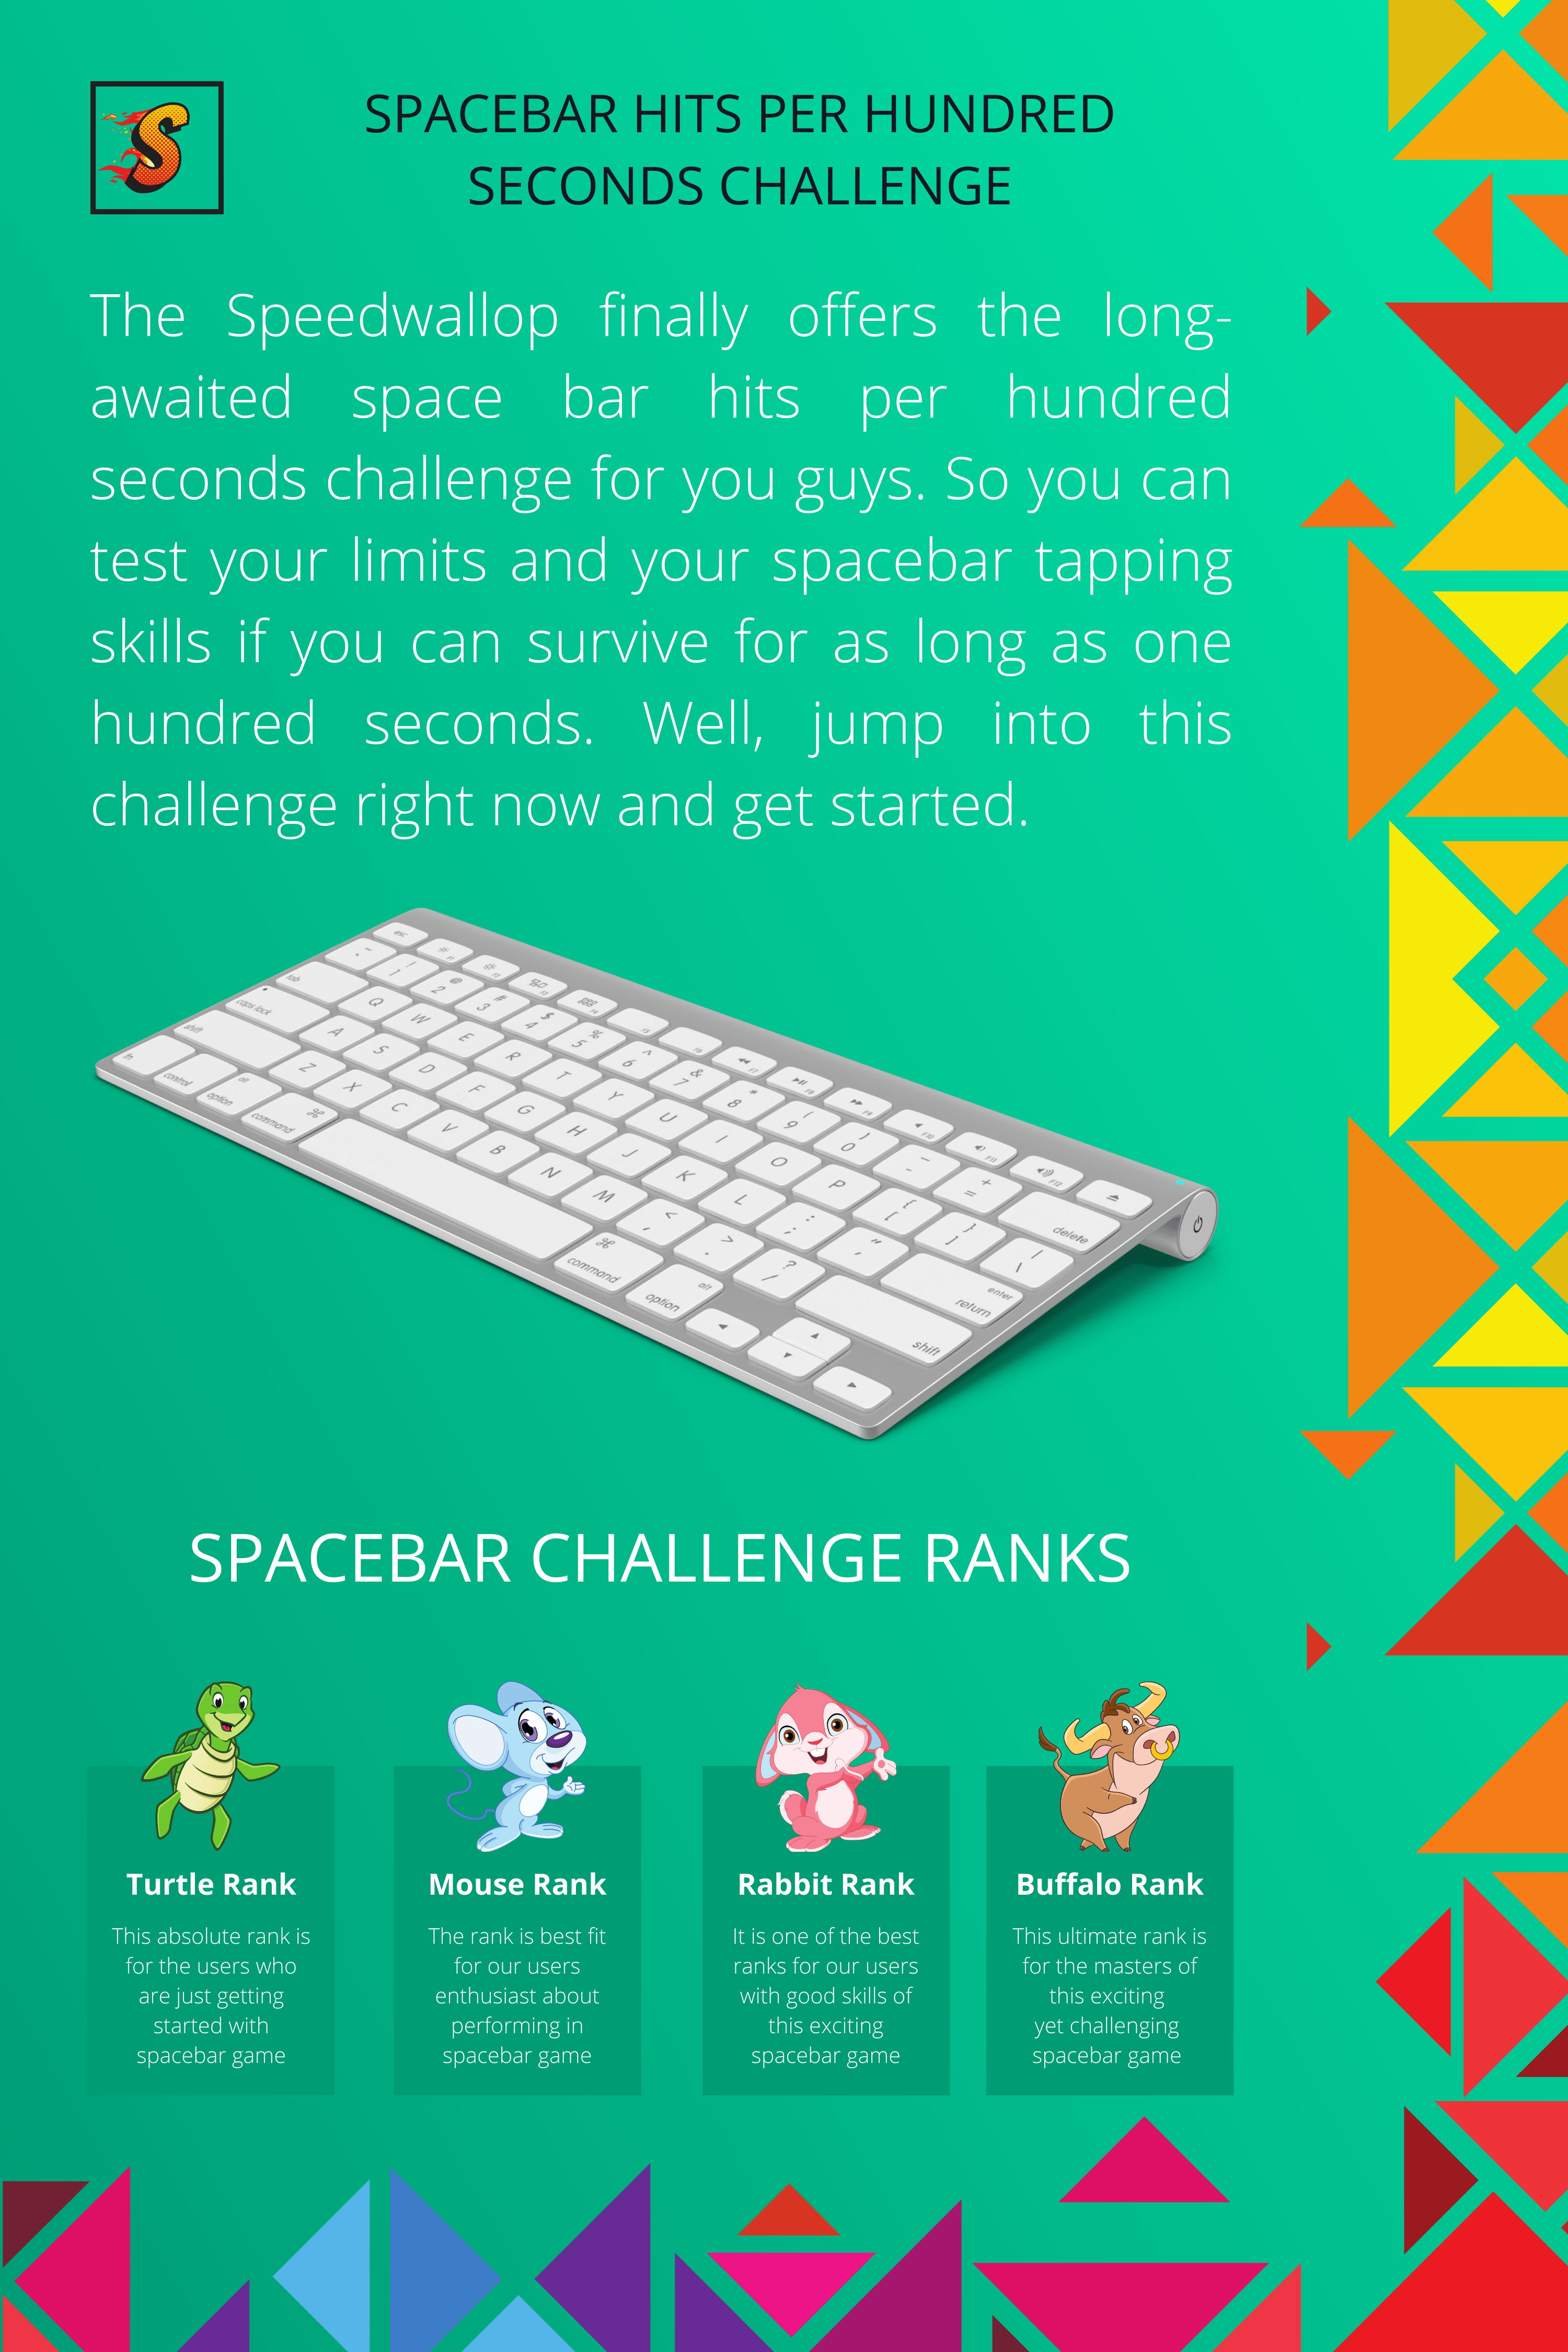 tap the spacebar 100 times